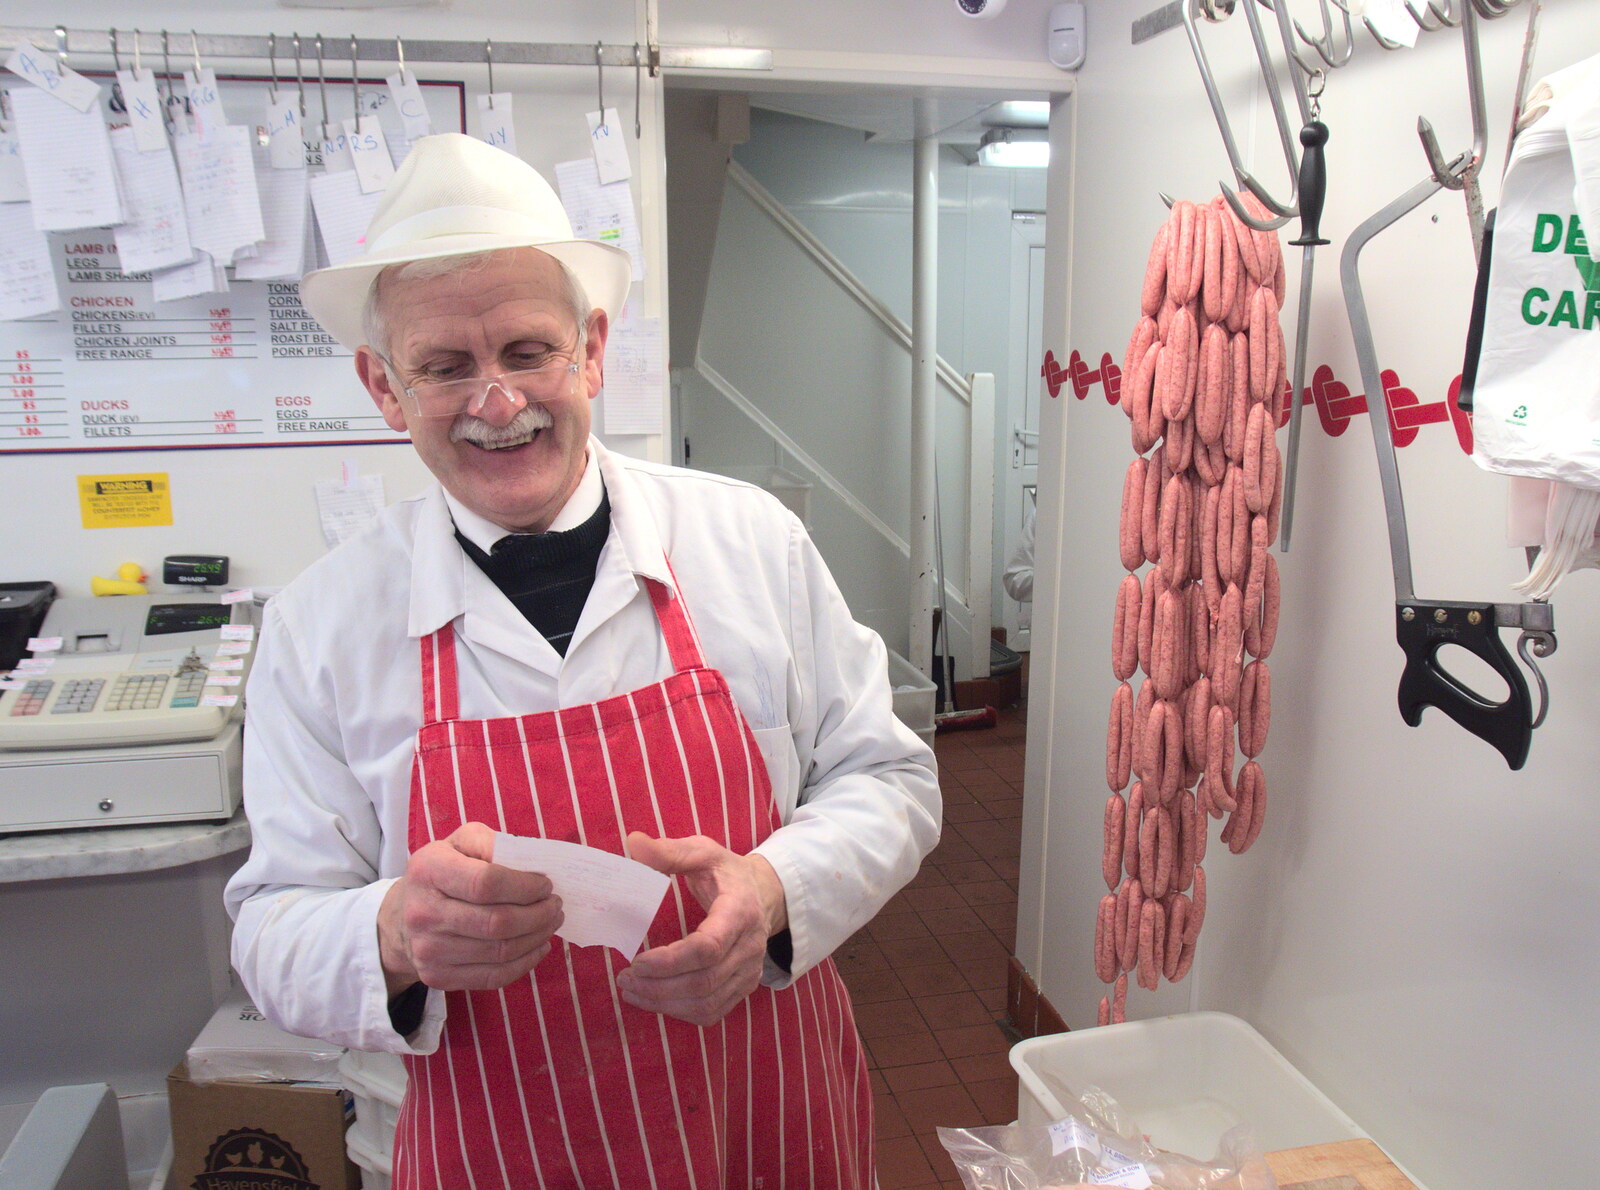 There are a lot of sausages hanging up in Browne's from A Spot of Christmas Shopping, Norwich and Diss, Norfolk - 23rd December 2017